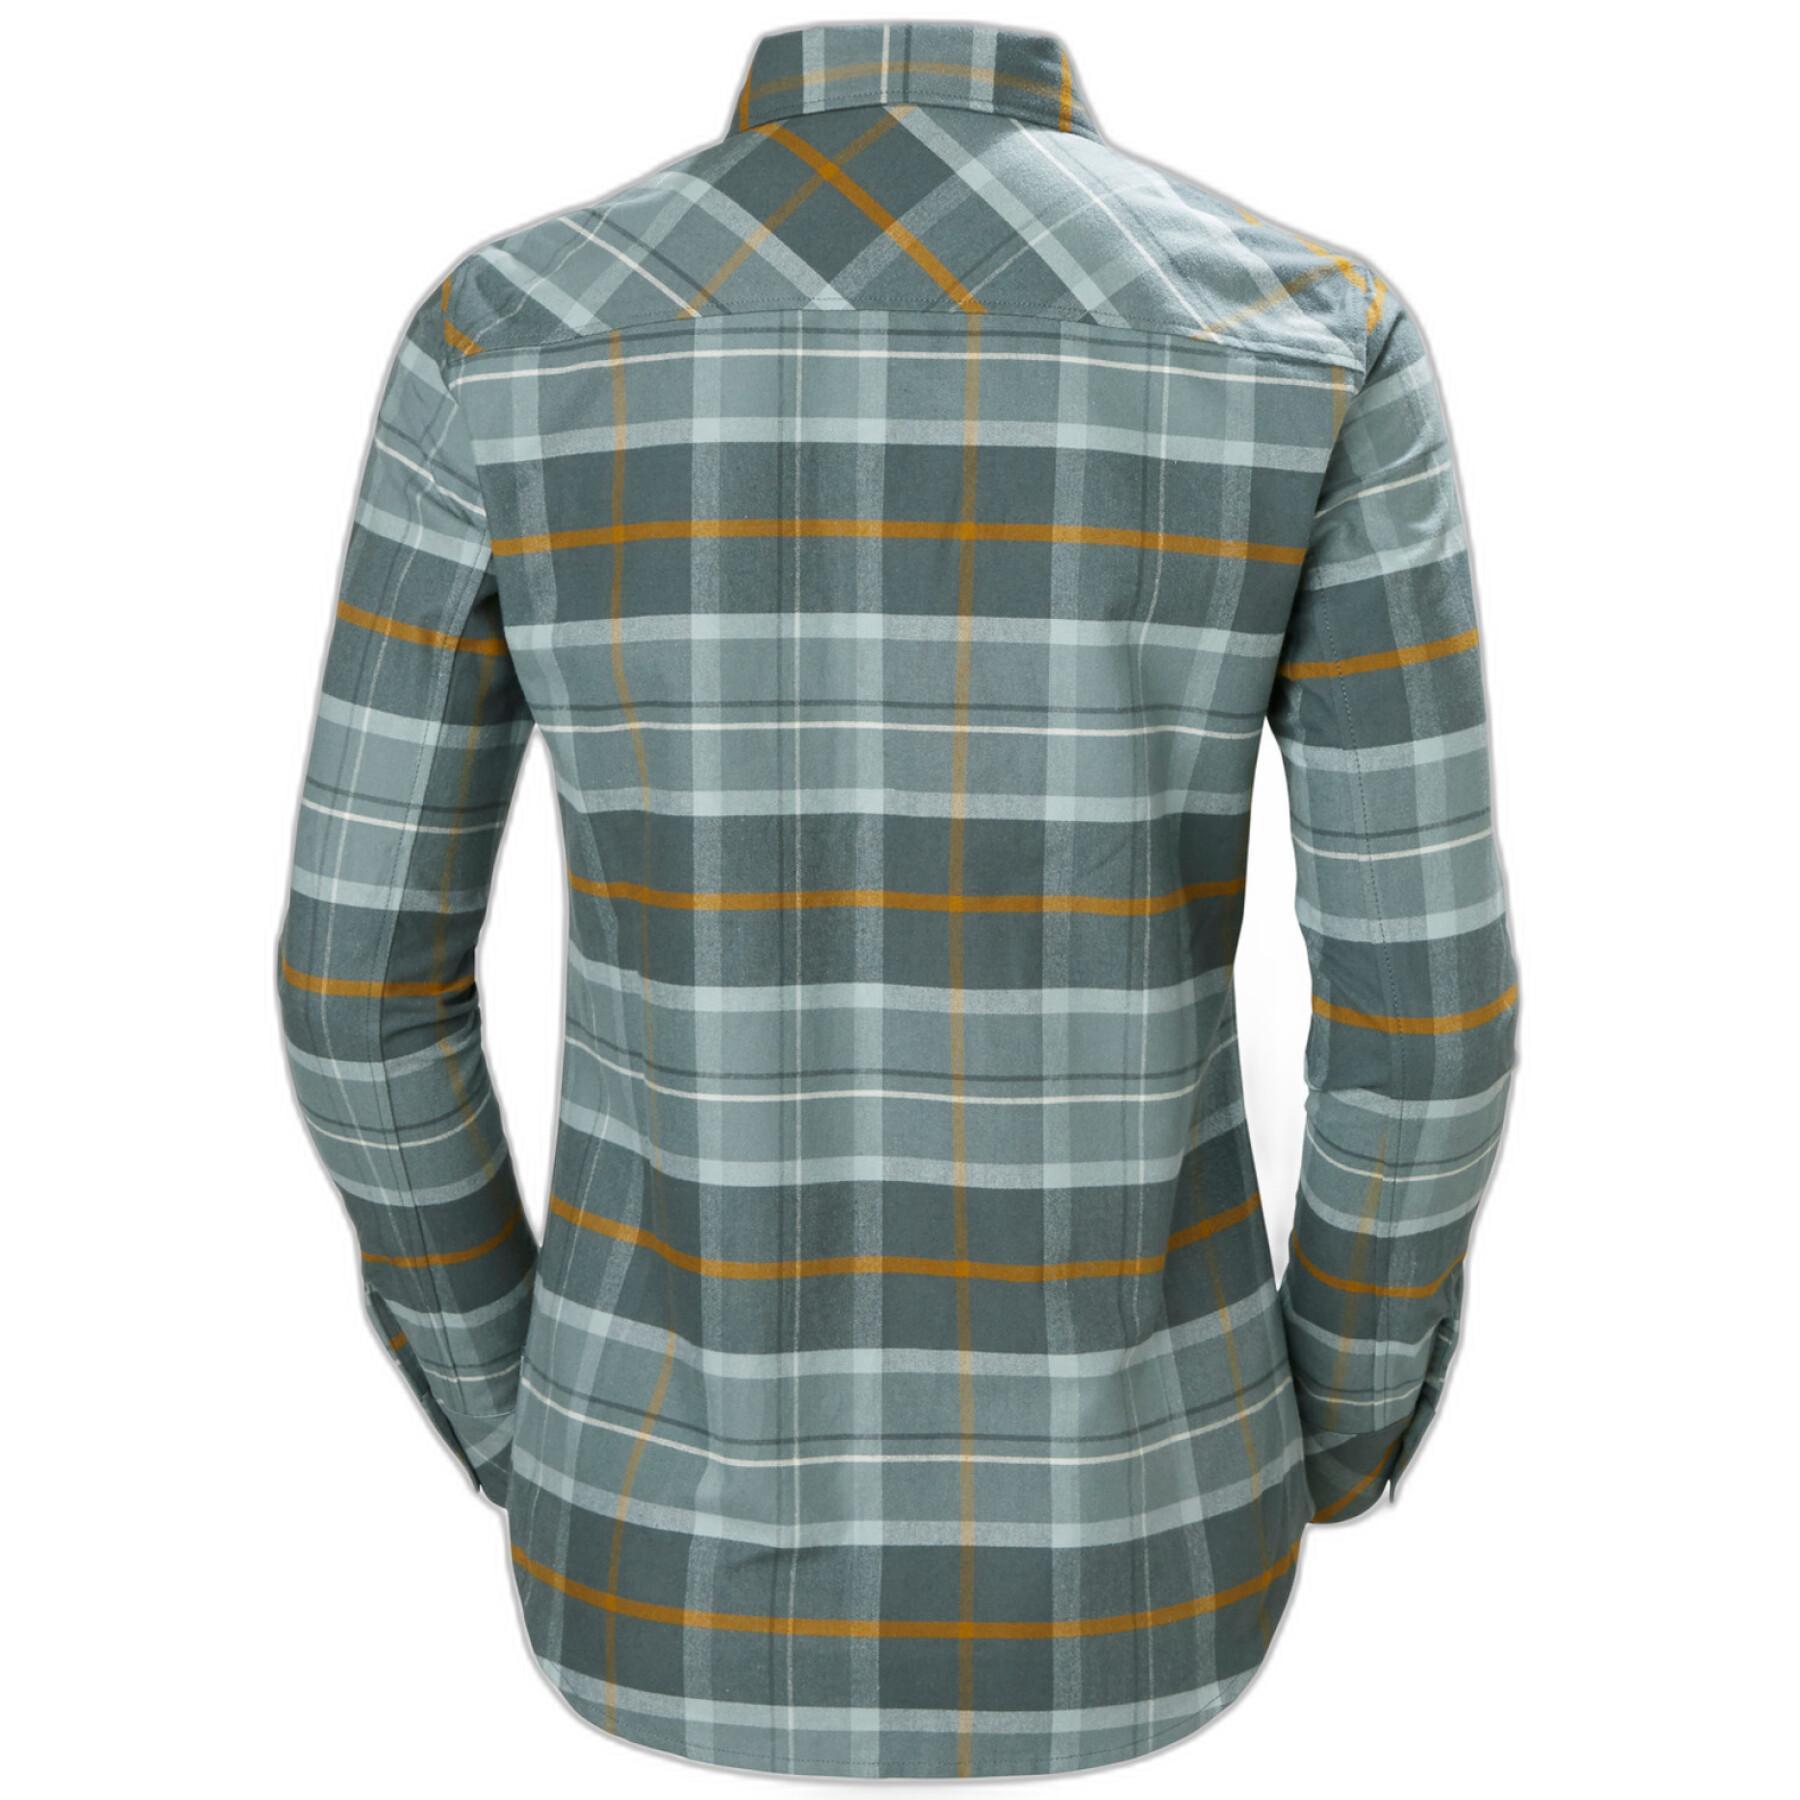 Long sleeve shirt with checkered pattern Helly Hansen classic checls